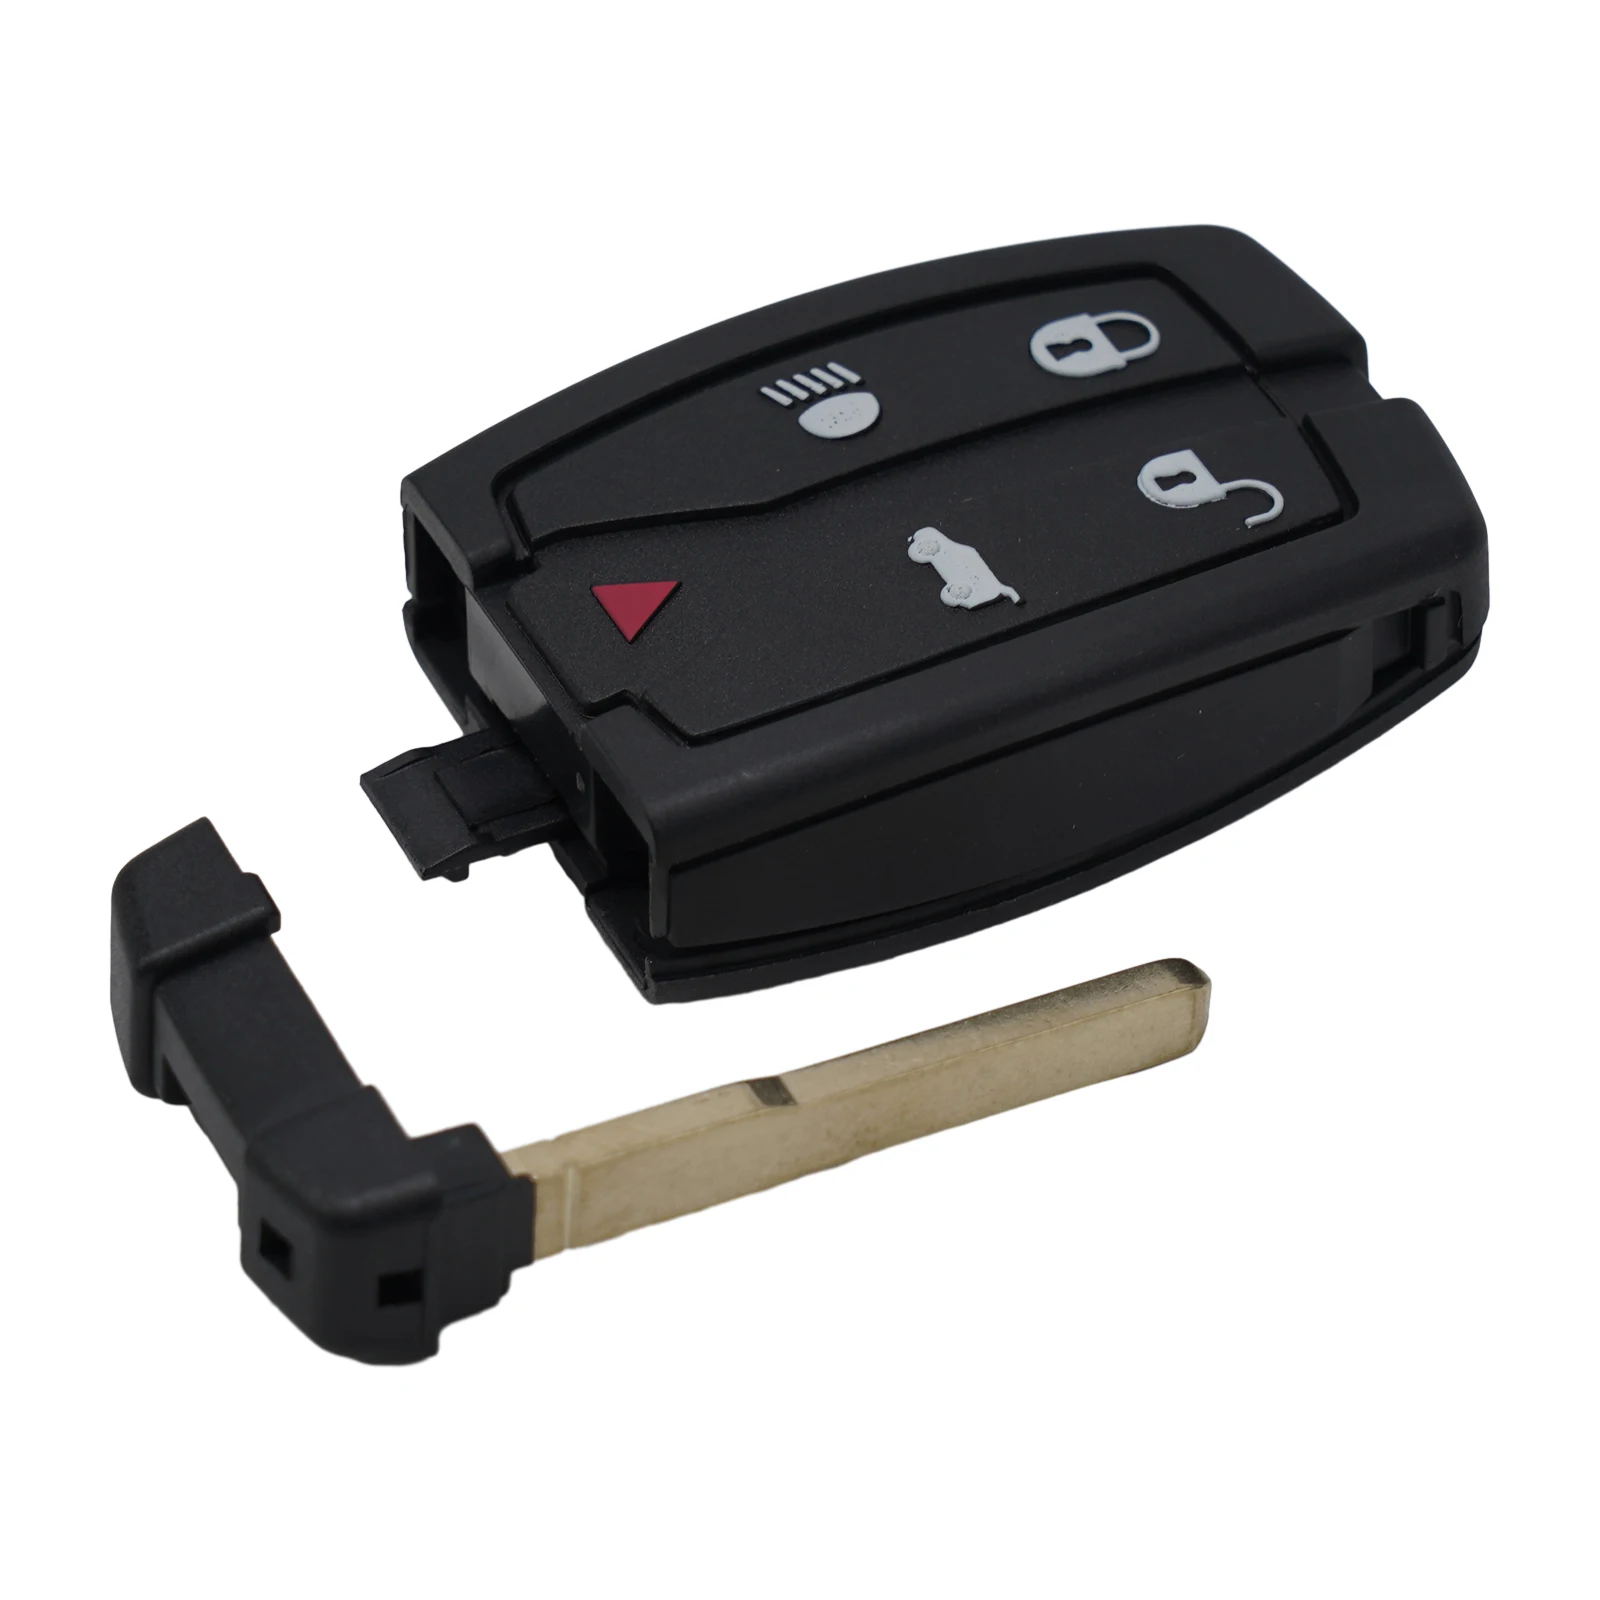 

Replace Your Broken Key Fob Case with this Shell for Land Rover For Freelander 2 ABS Material Universal Fitment